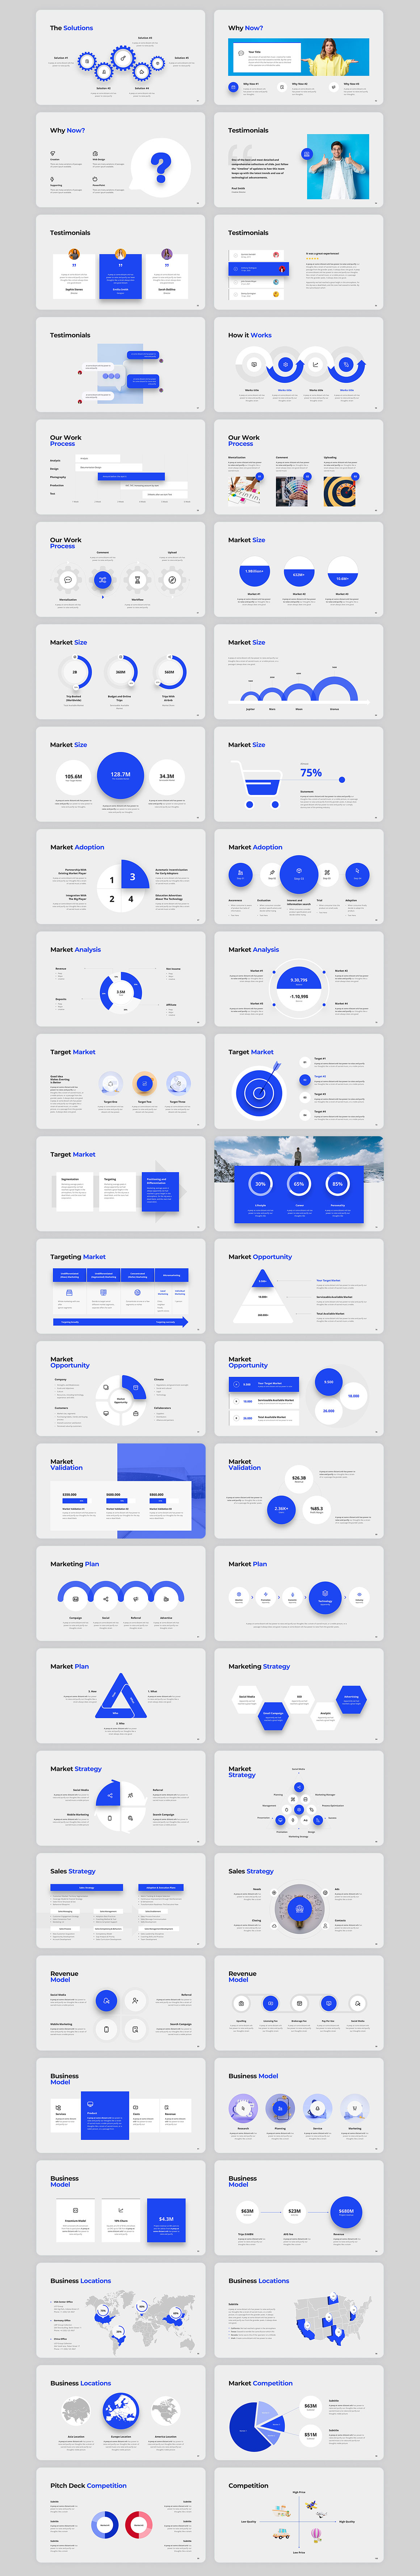 Startup Perfect Pitch Deck Powerpoint Template - 11